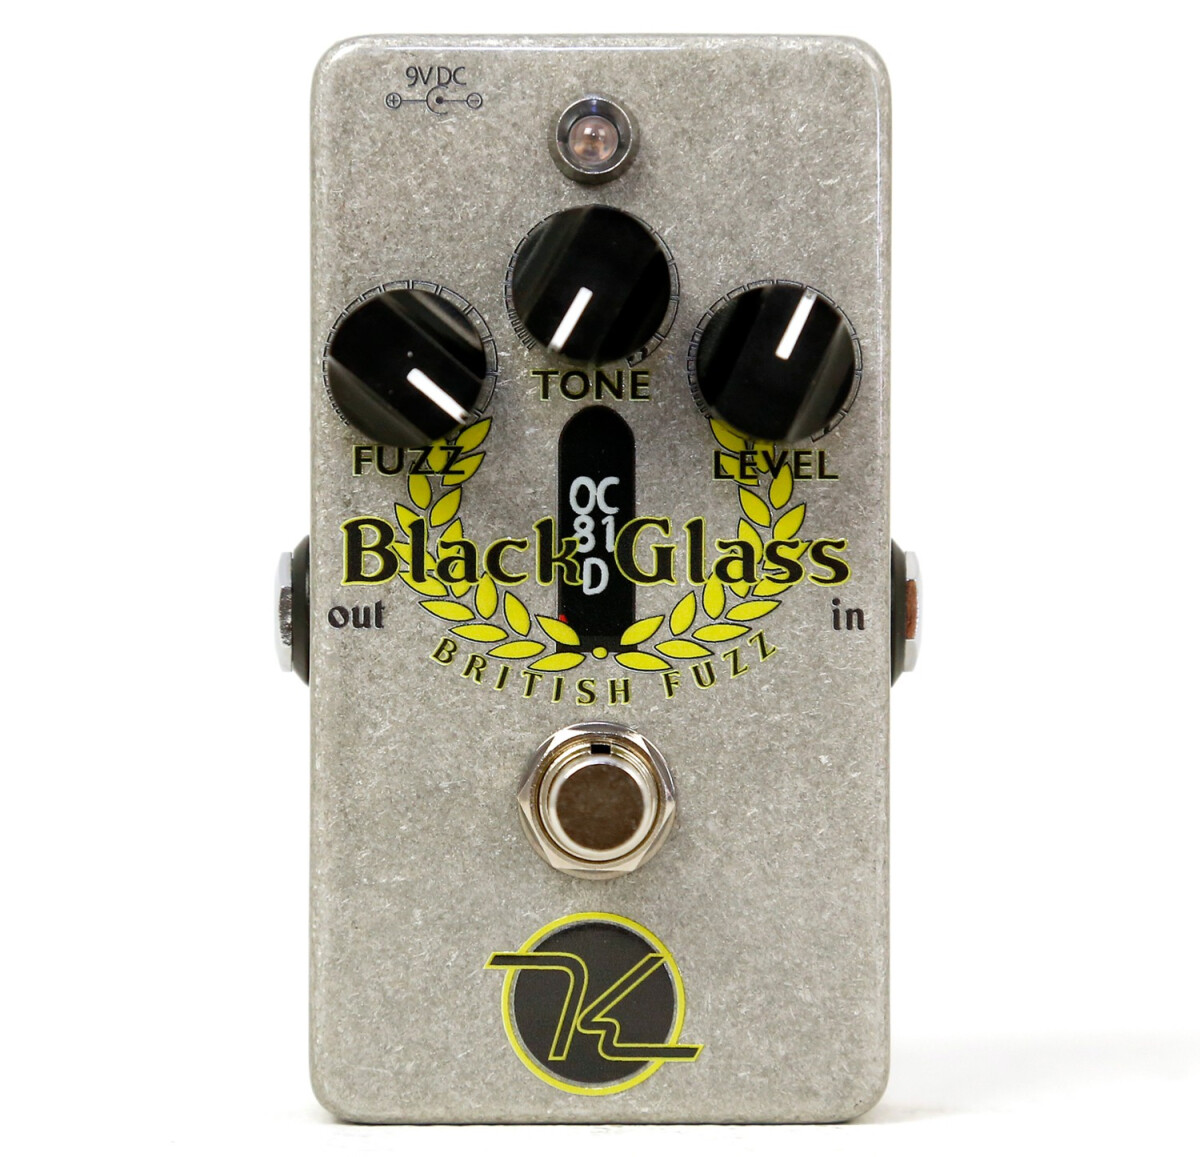 A British Fuzz in limited edition at Keeley’s